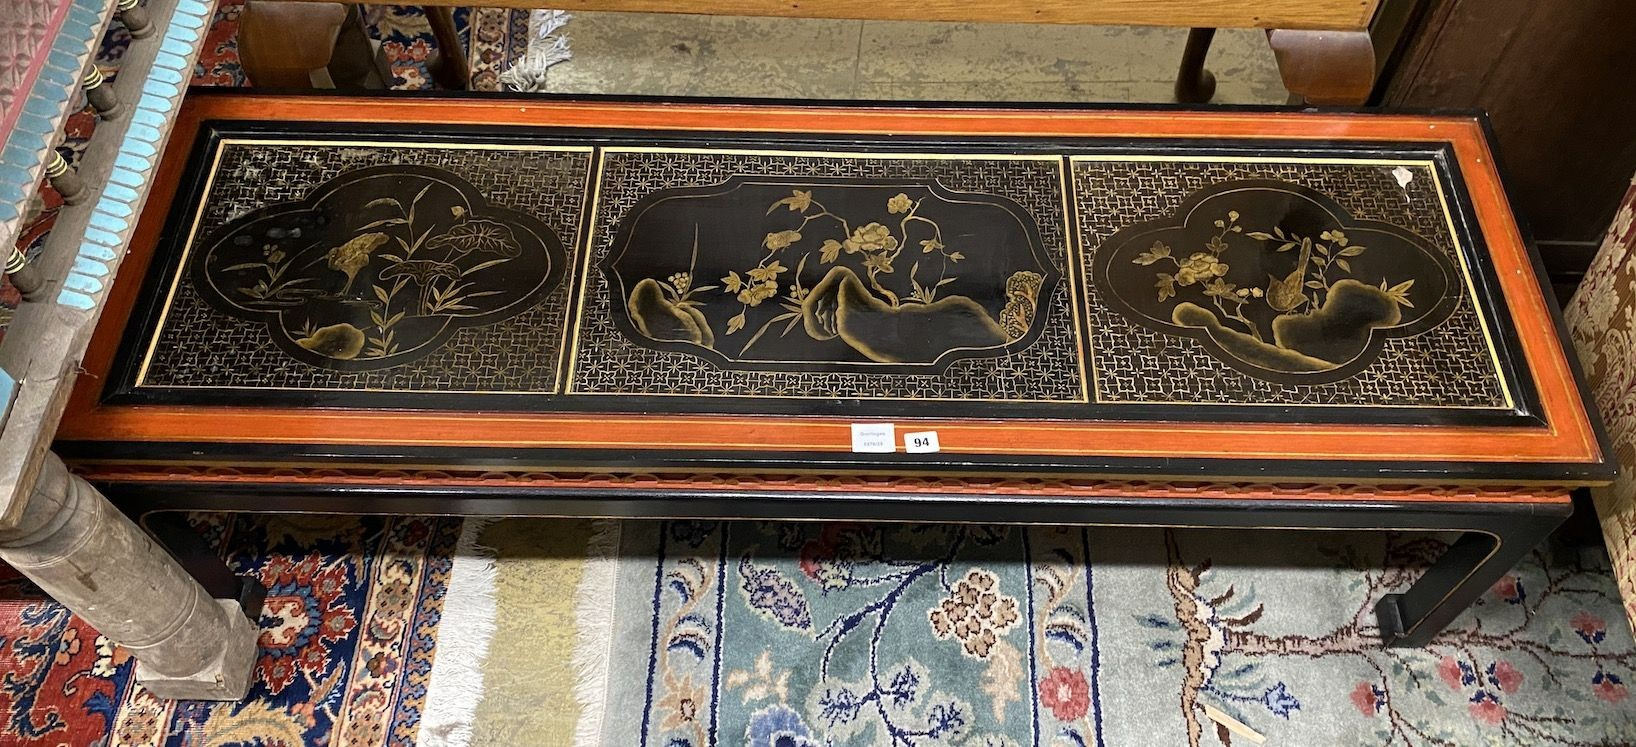 A Chinese black and red lacquered coffee table, the top inset three 18th century lacquer panels, length 138cm, depth 47cm, height 45cm